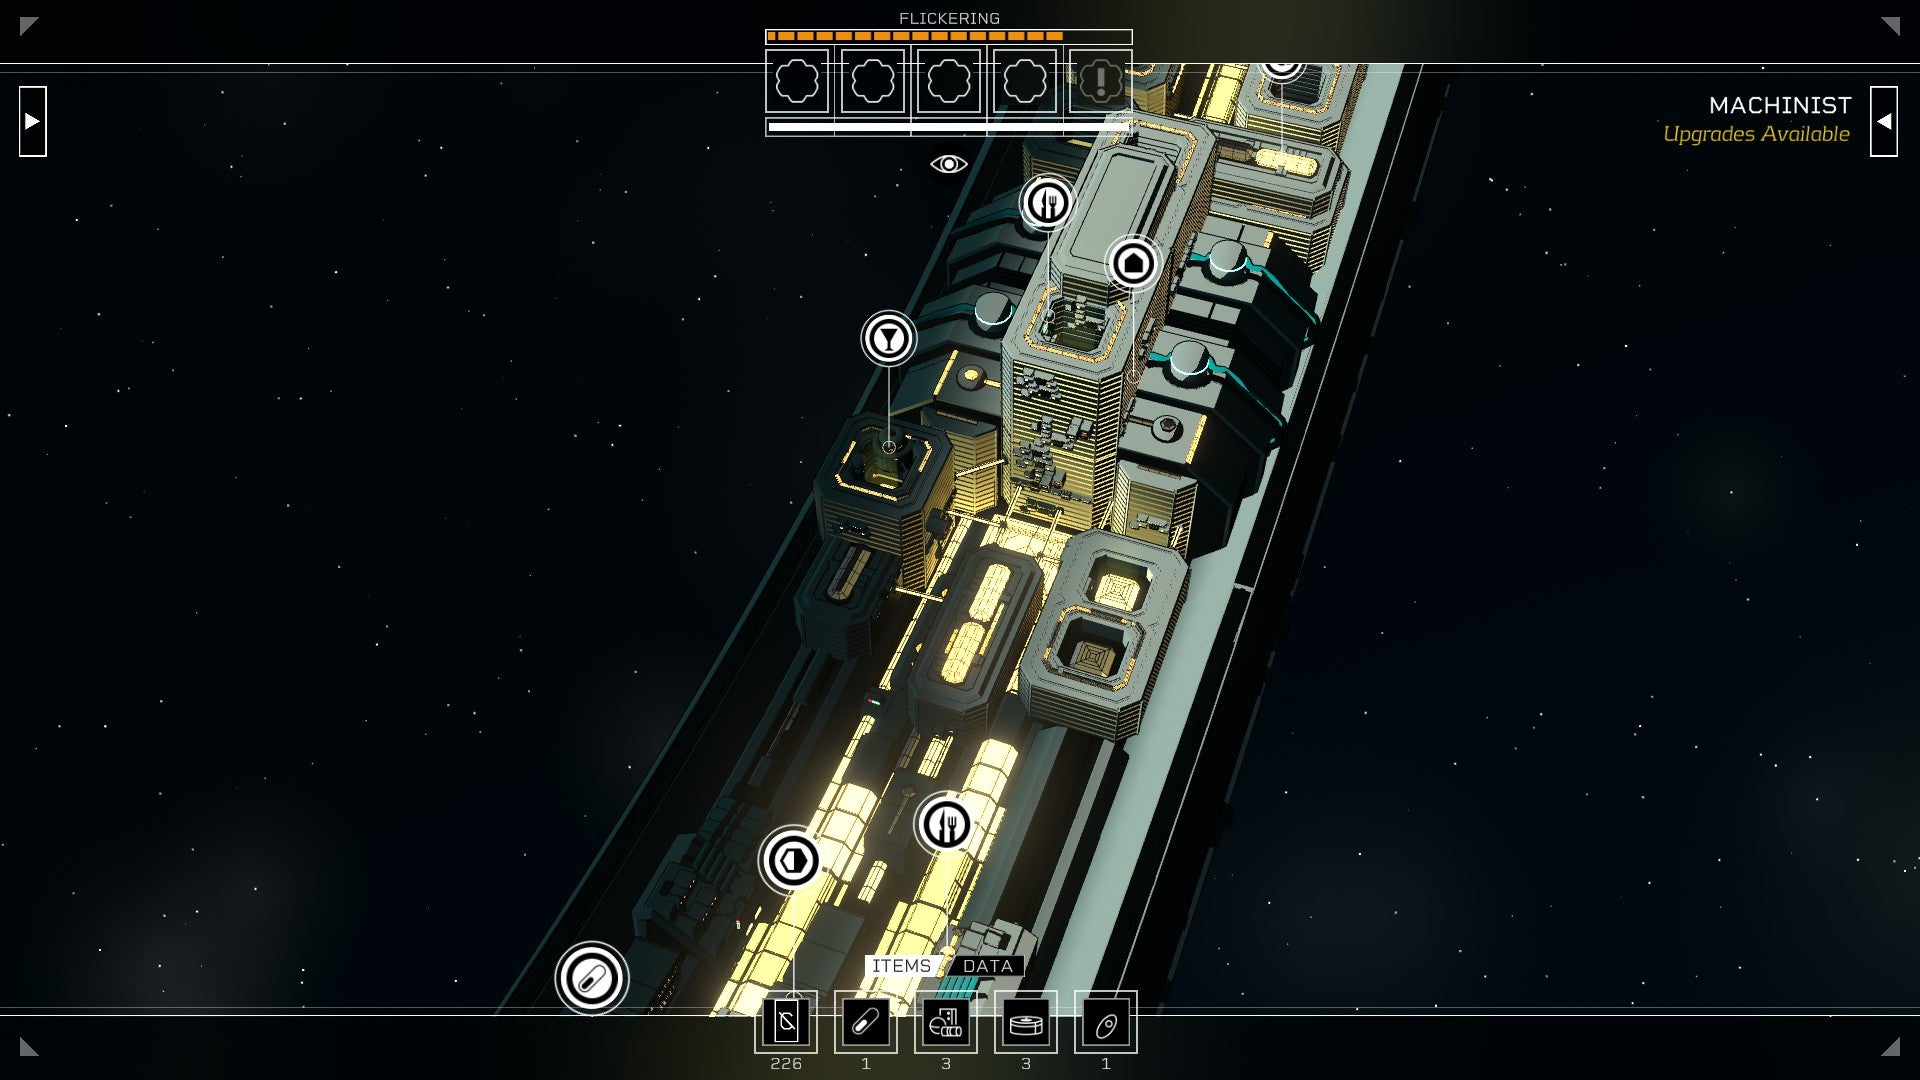 Citizen Sleeper review - view of a part of the space station called the Lowend, a low-income residential district of little tower blocks and other buildings.